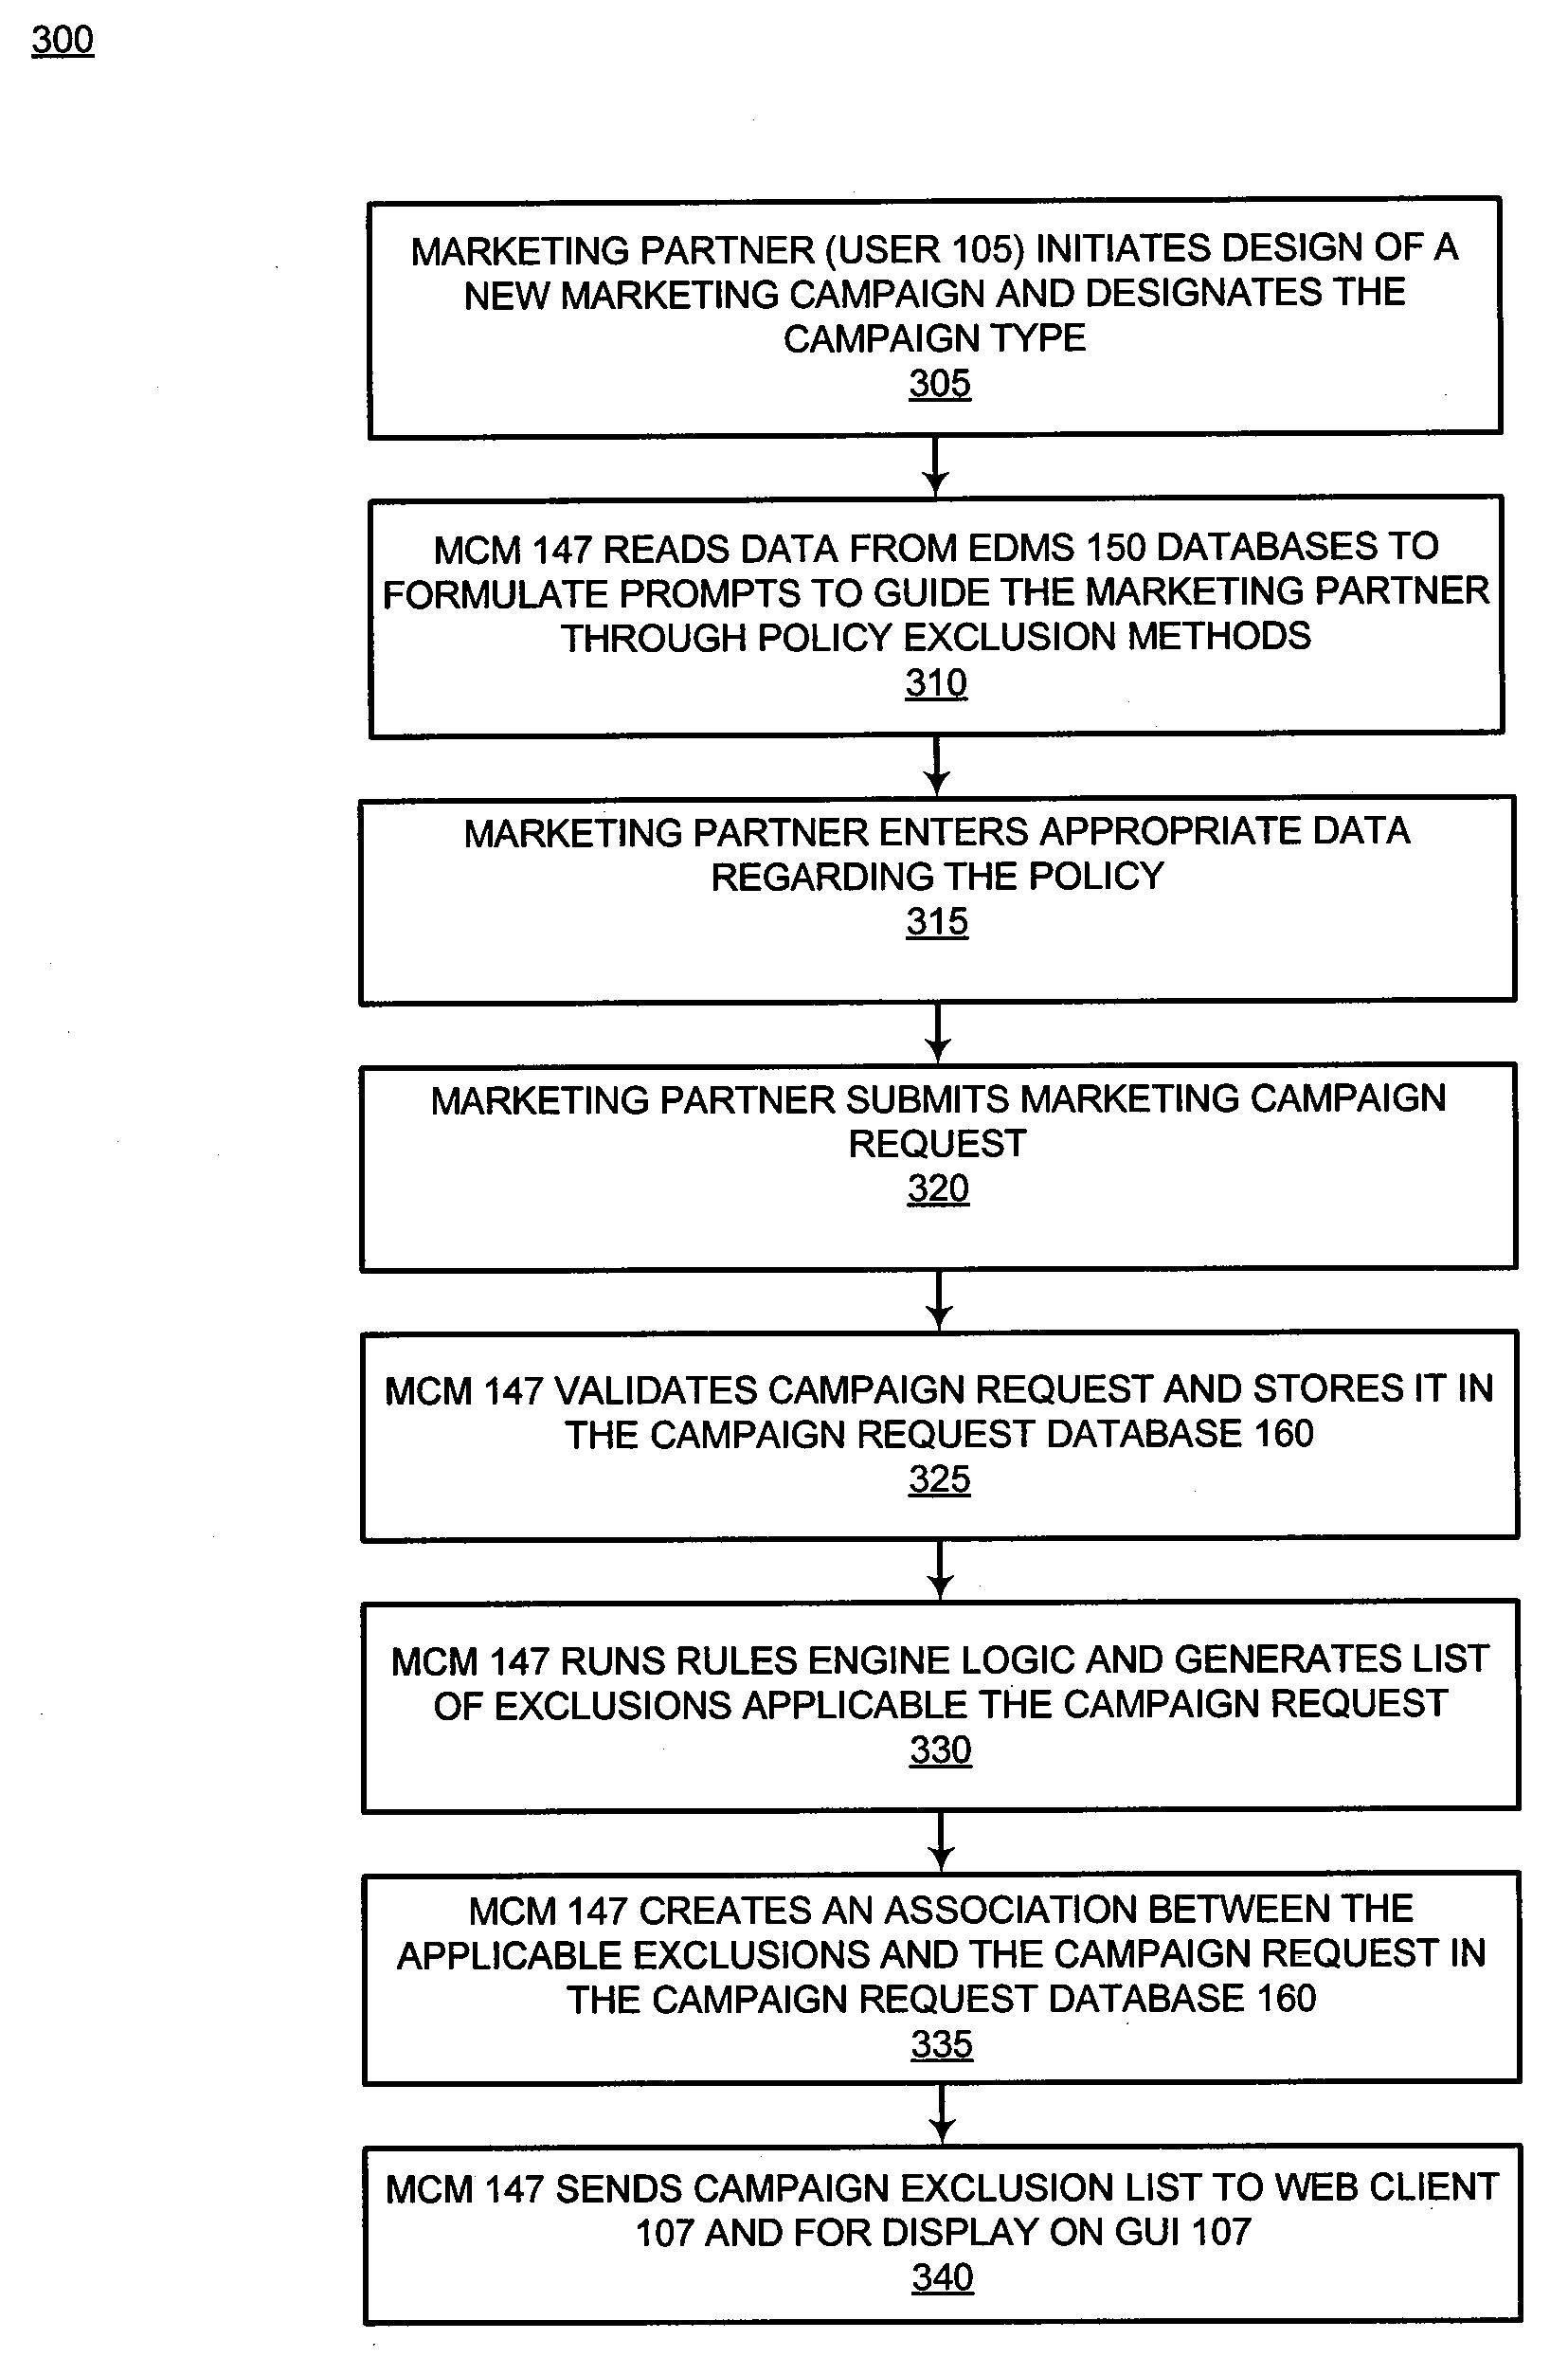 Policy and contract compliance system and method